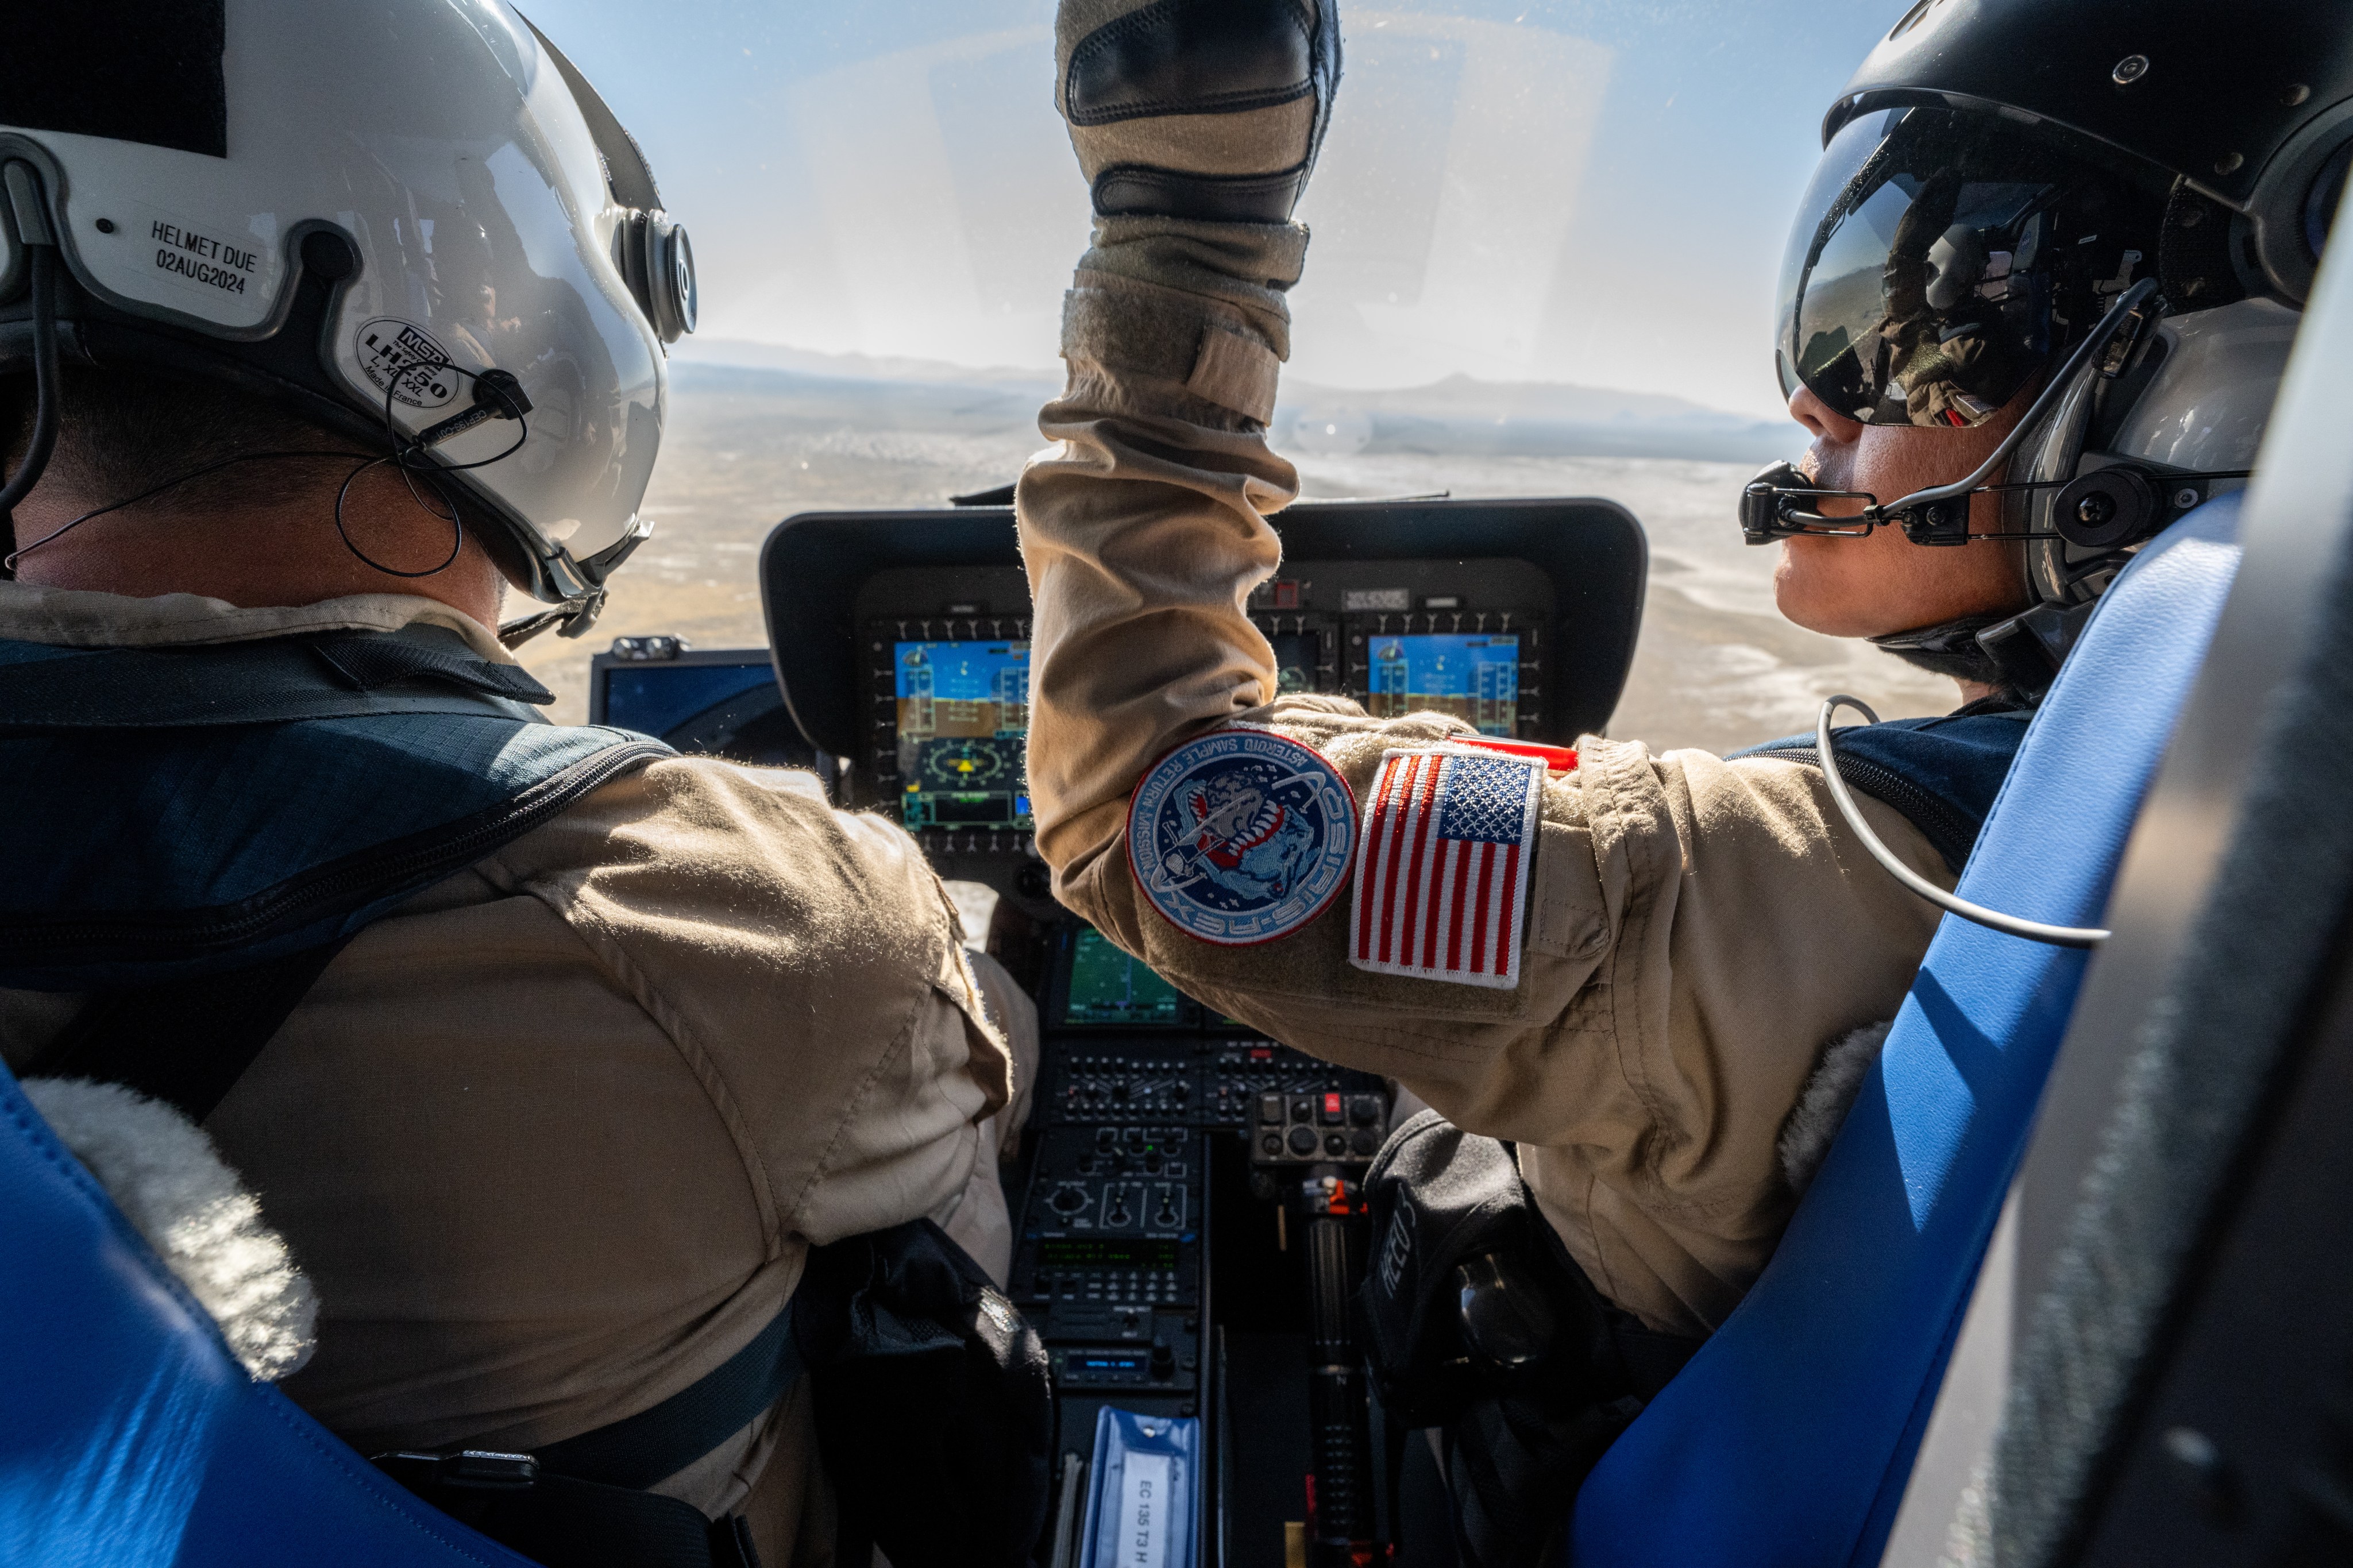 From behind, we see two people fly a helicopter. One lifts his arm, showing an American flag patch and OSIRIS-REx mission patch